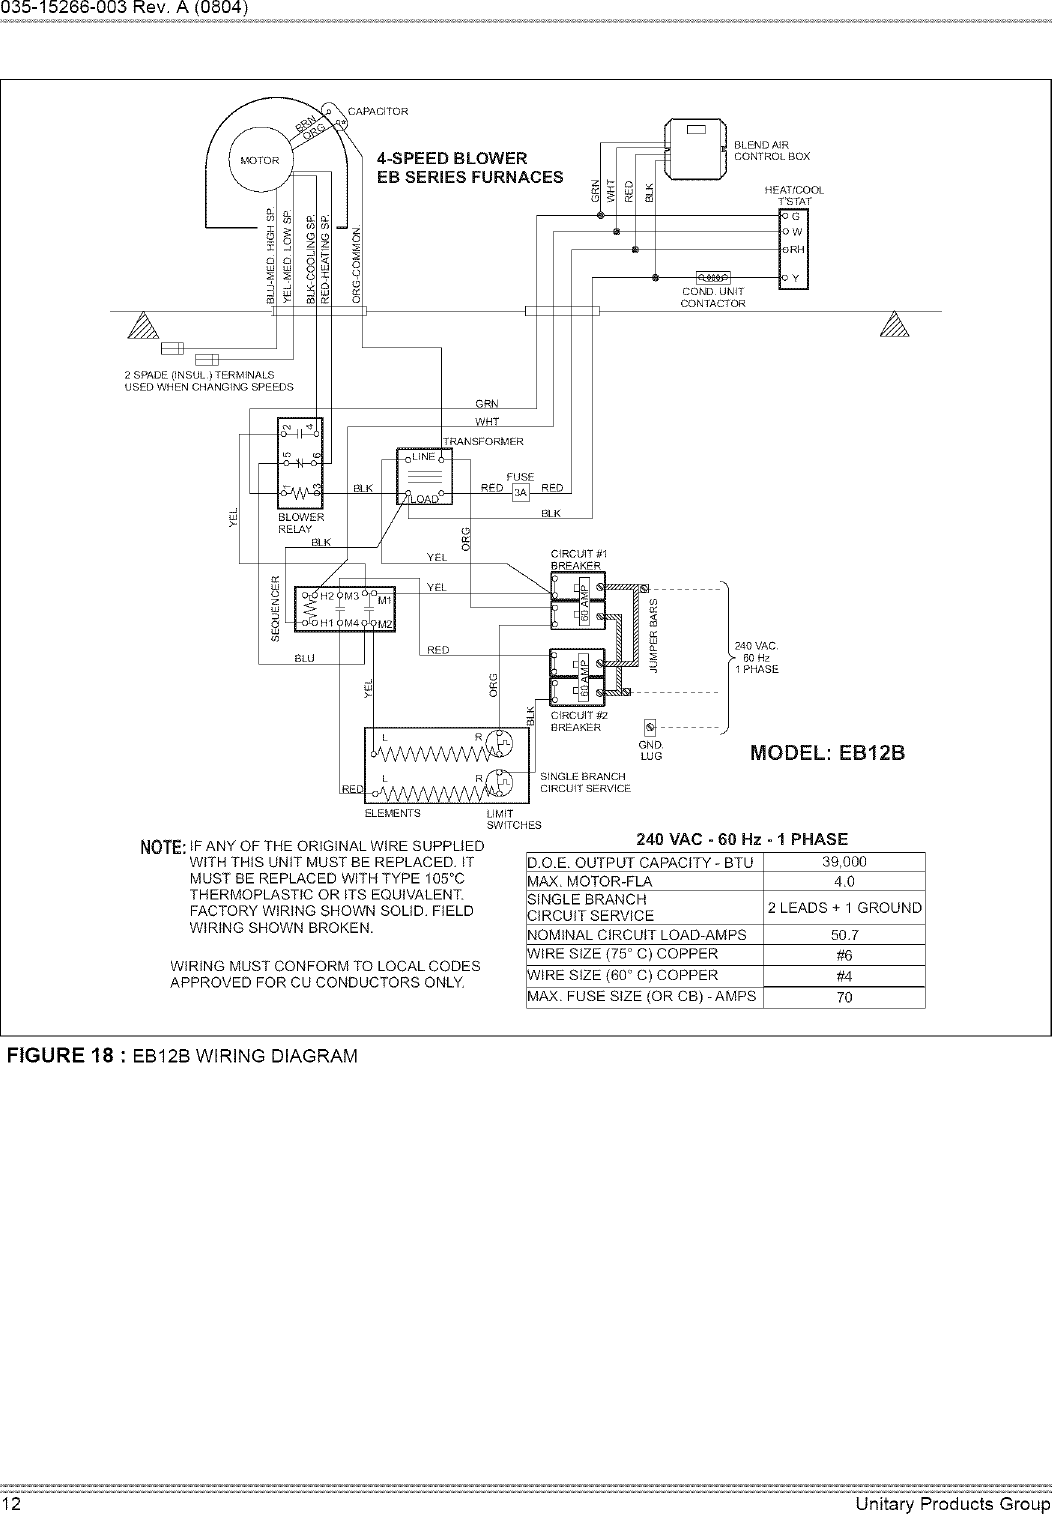 Coleman Electric Furnace Wiring Diagram - Coleman Evcon Presidential